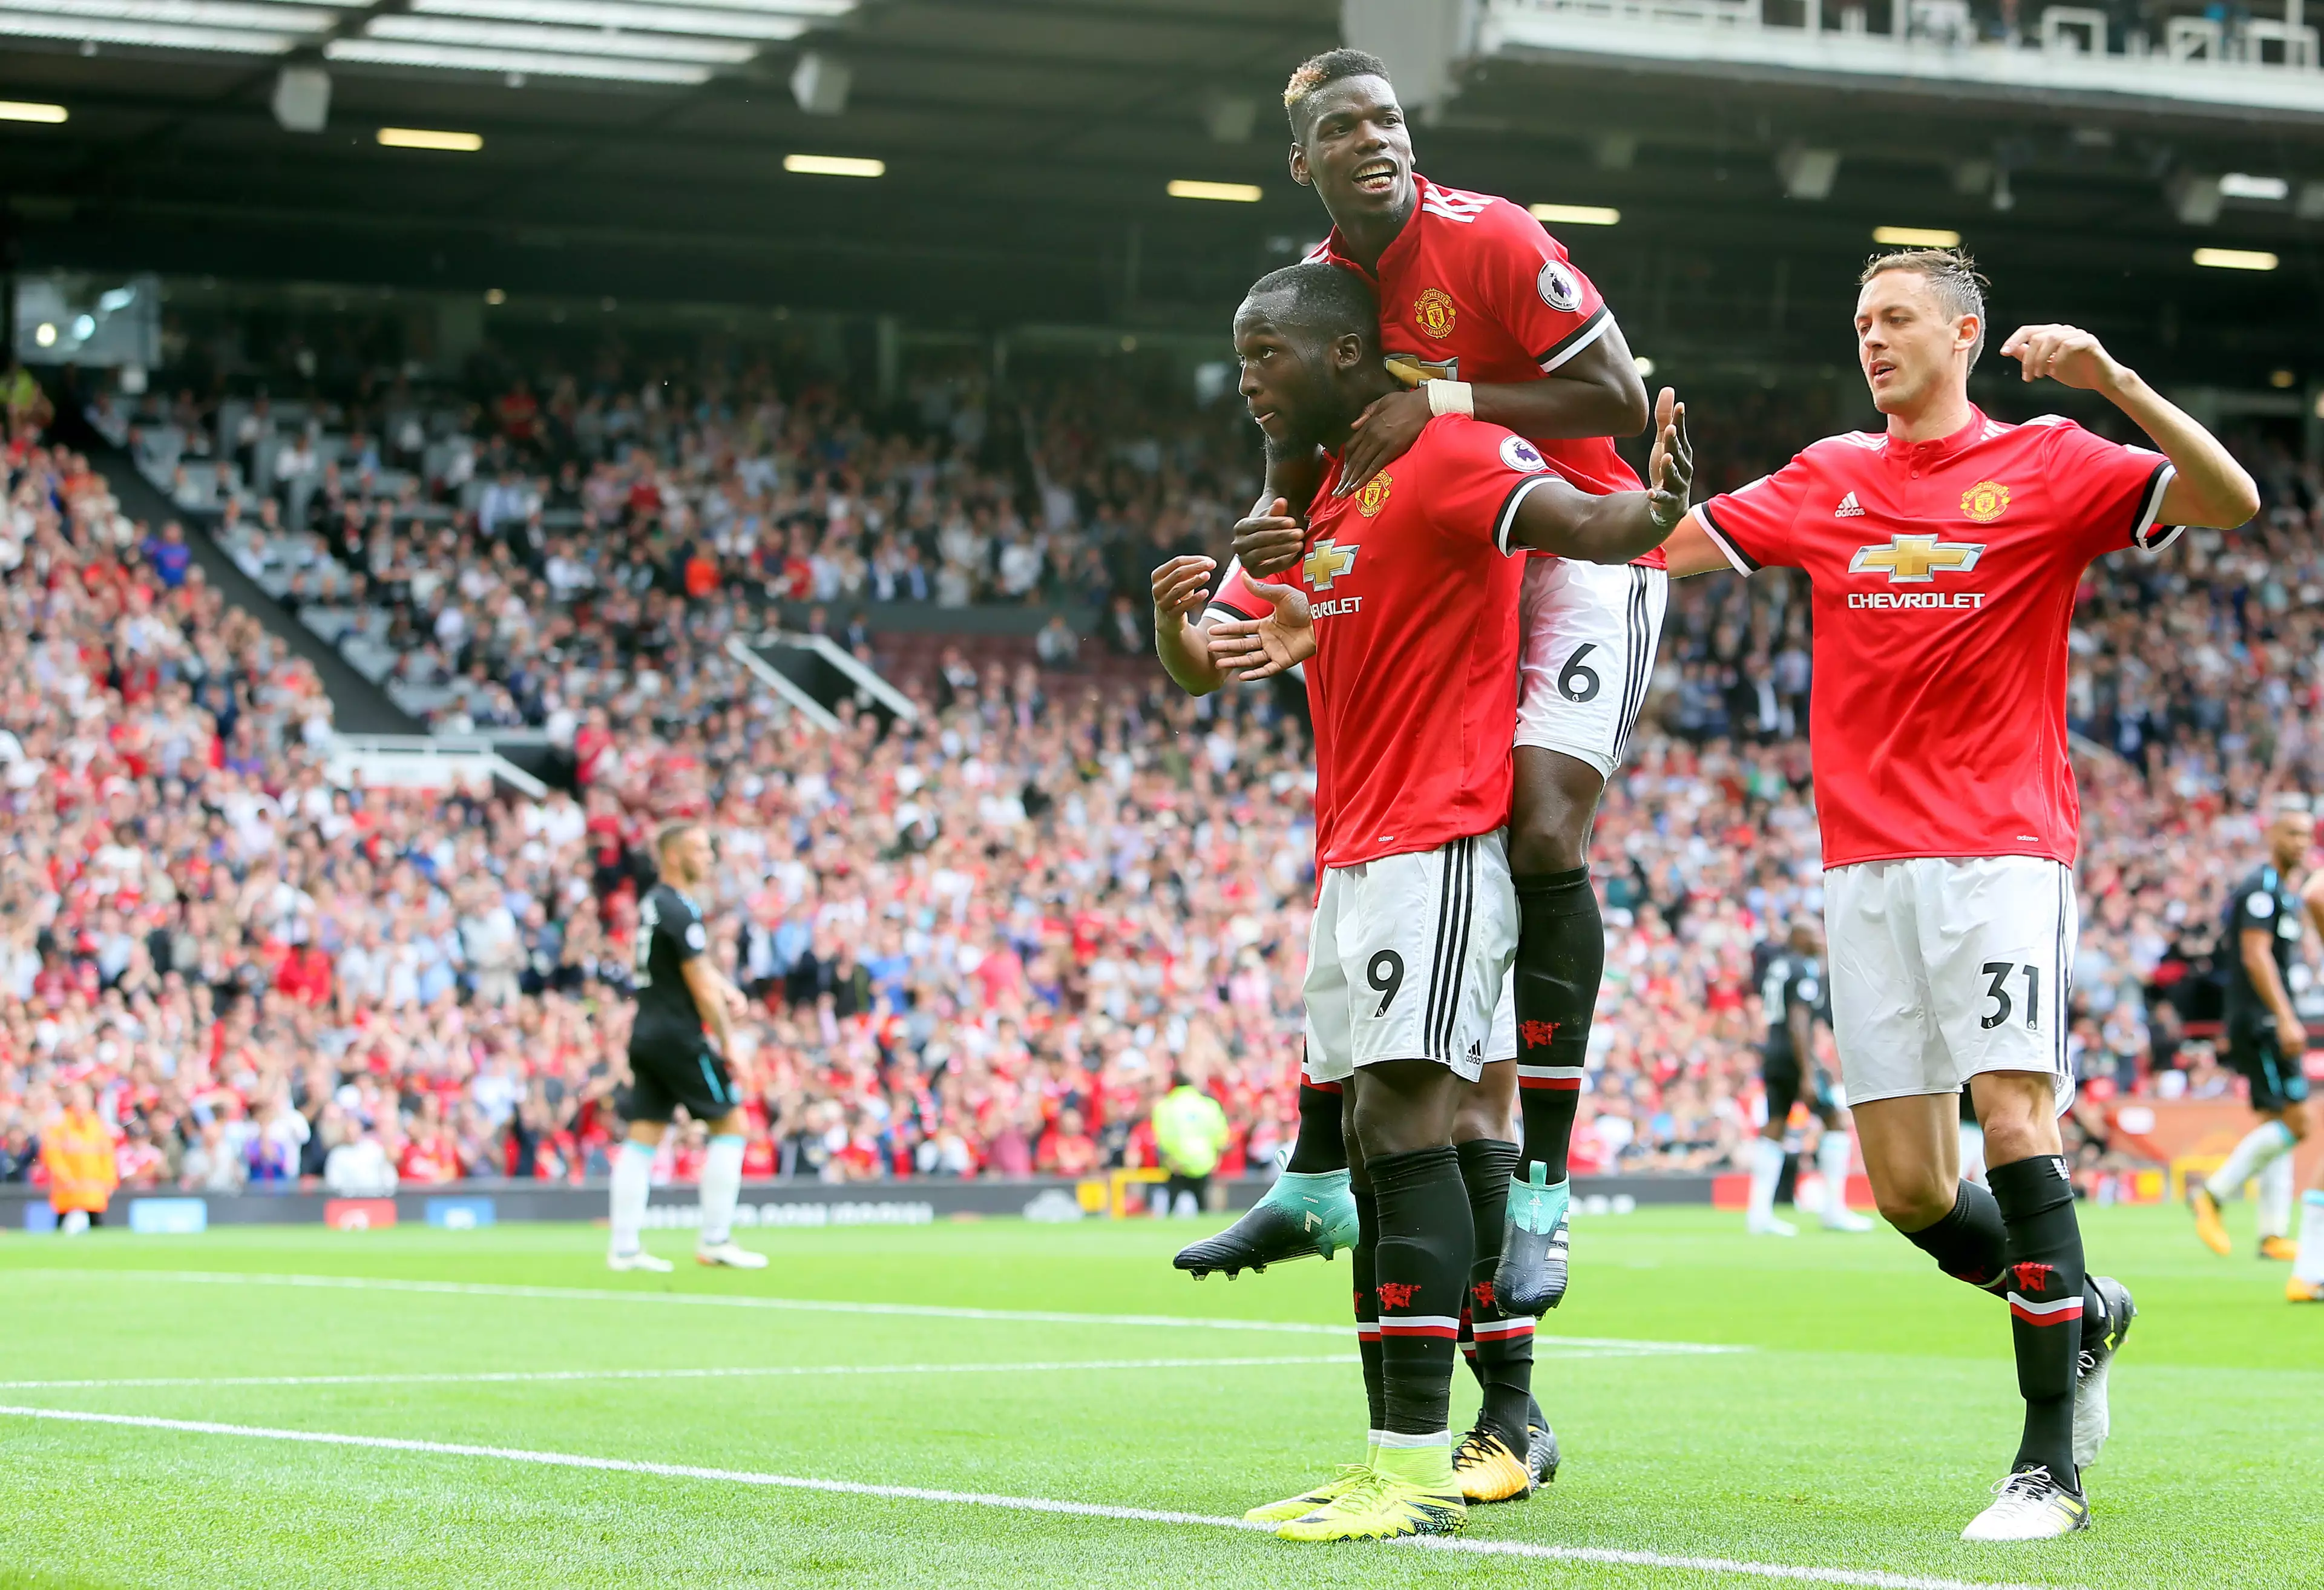 Lukaku made a barnstorming start to his United career, but has been relatively hit and miss, since then. Image: PA